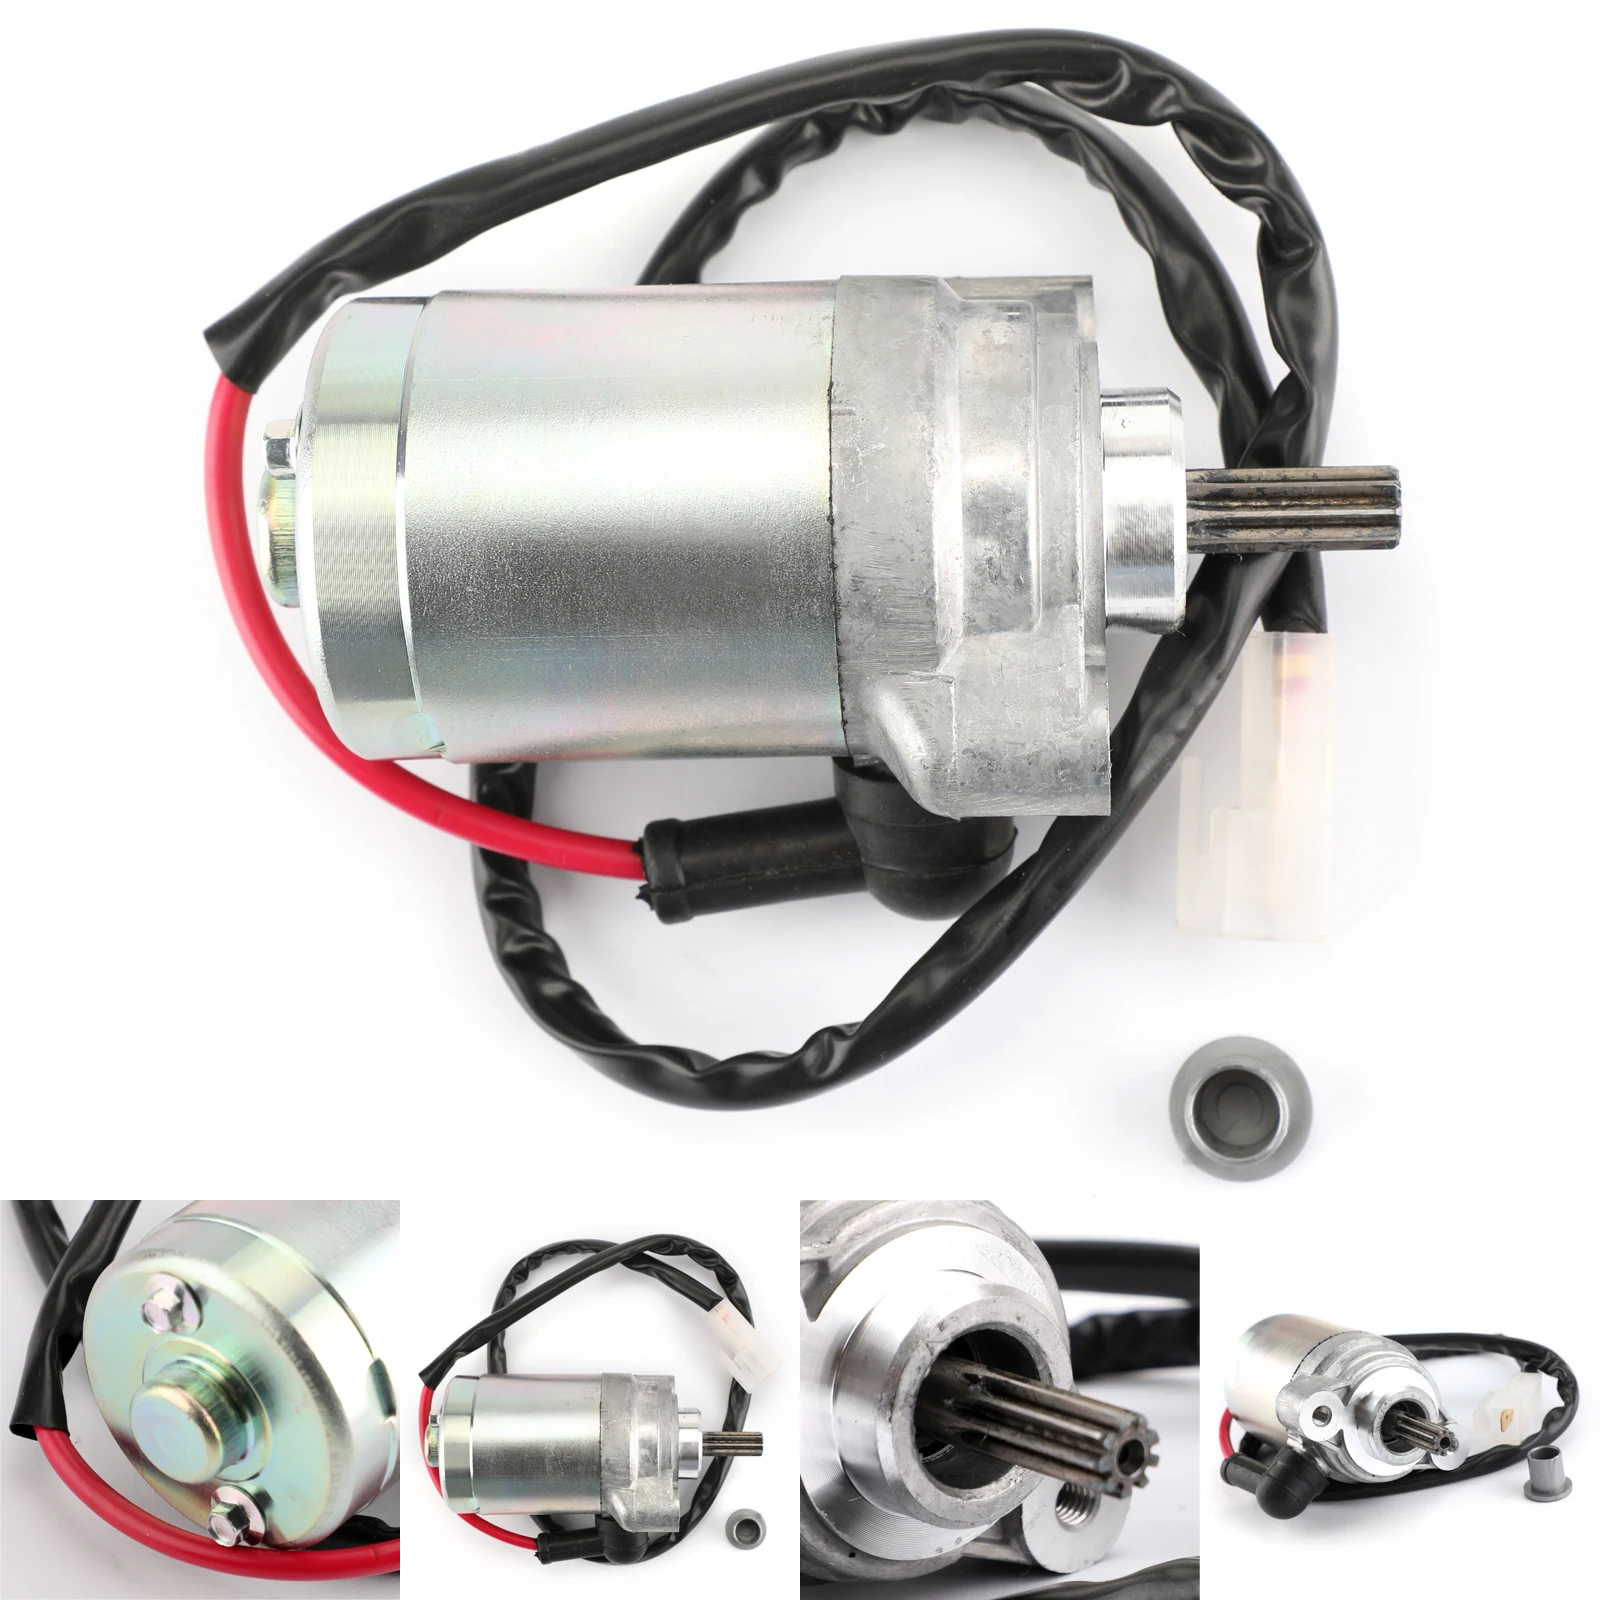 

Topteng STARTER Motor For Yamaha MT125 MT-125 15-16 YZF R15 R125 WR125 WR125R 2009-2014 Motor Accessories